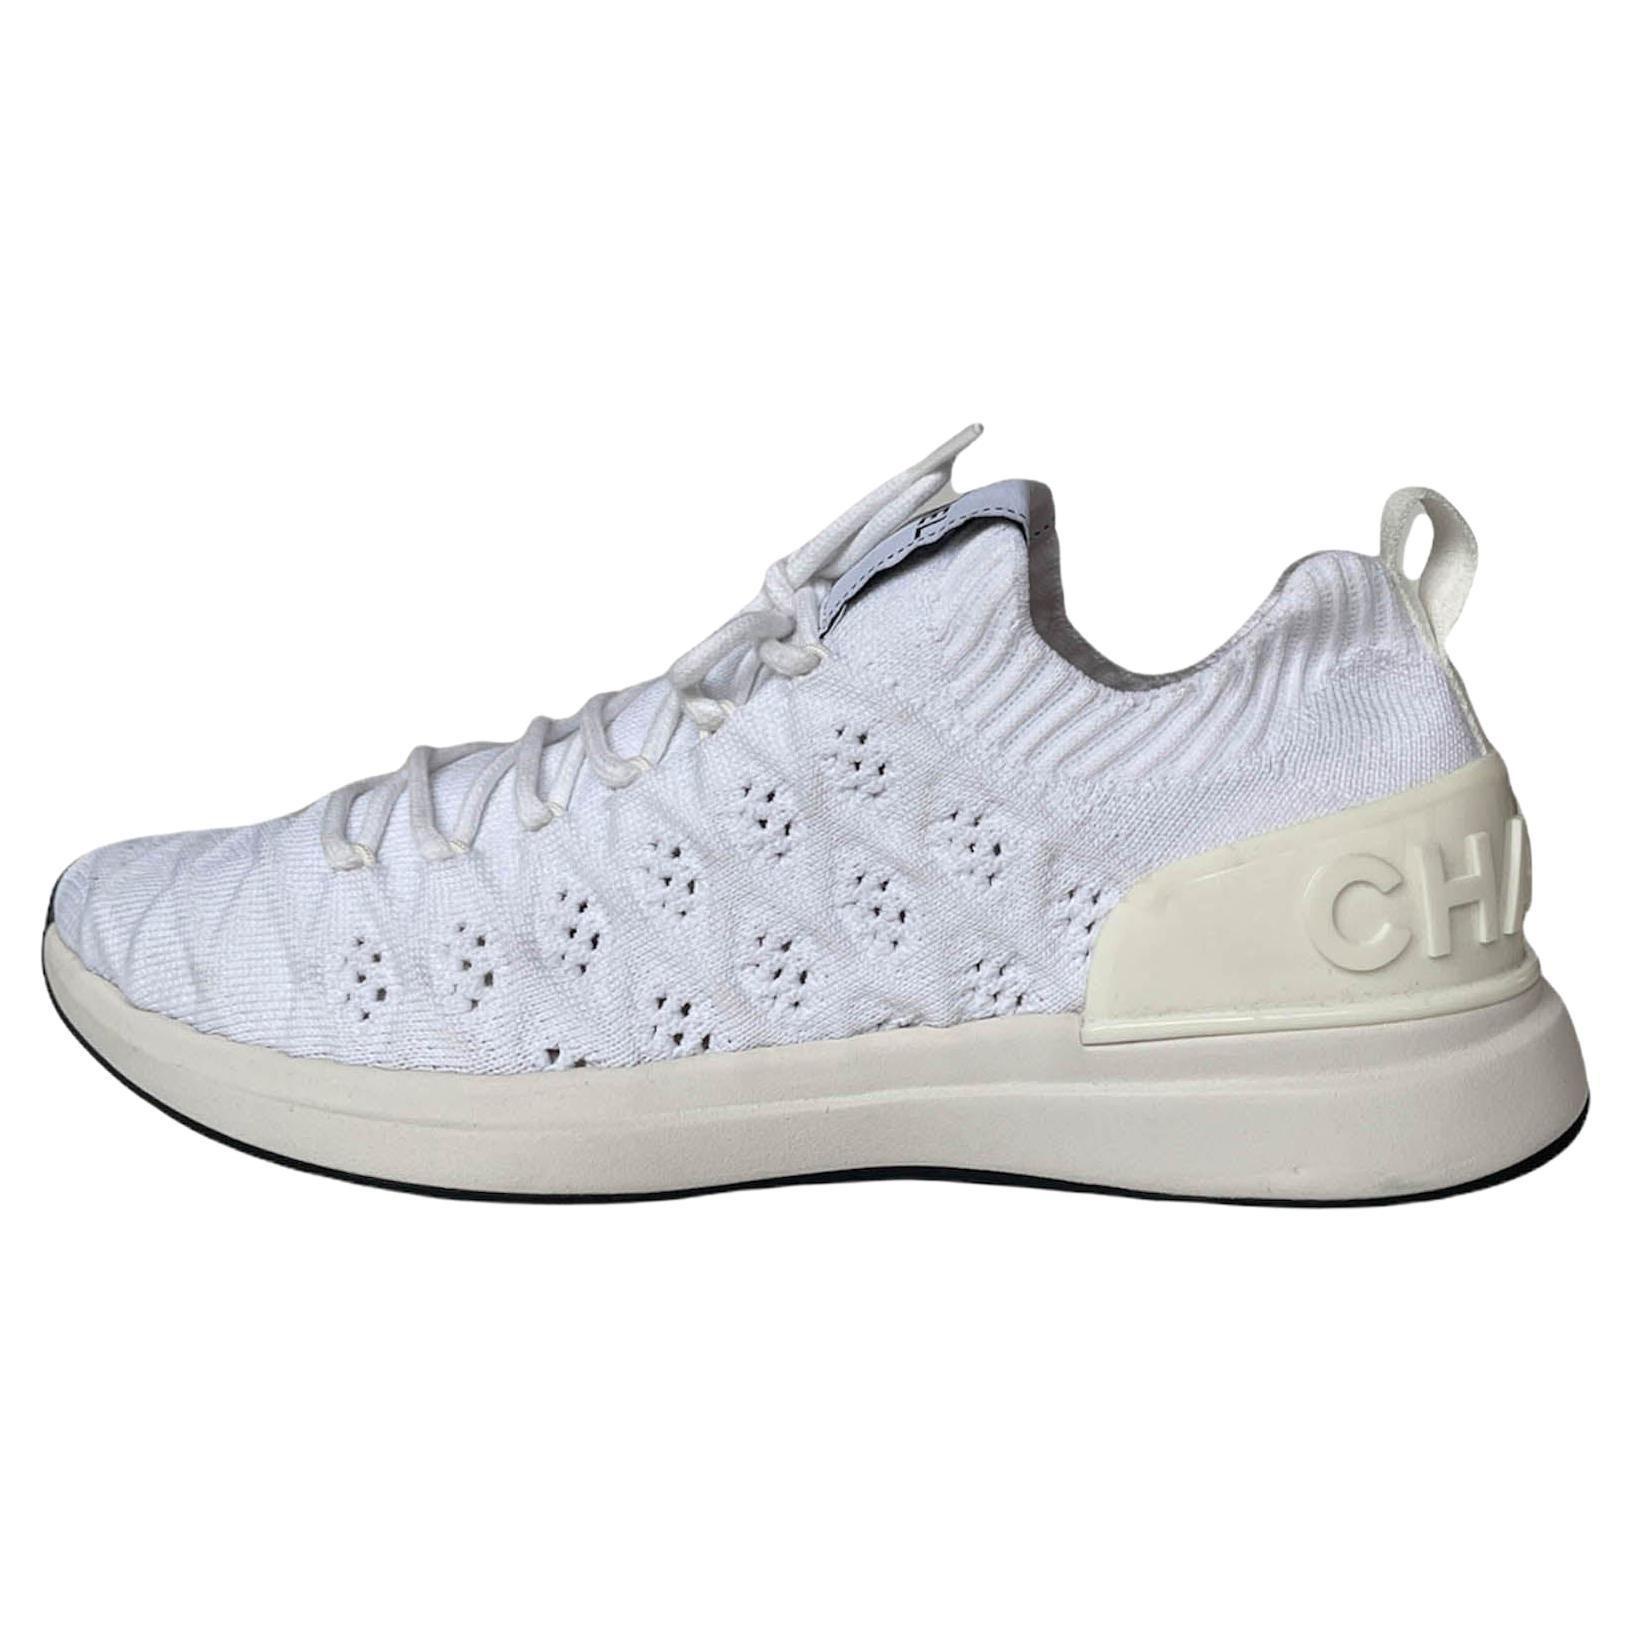 Chanel White Quilted Knit Sock Low Top Athletic Sneakers sz 38.5